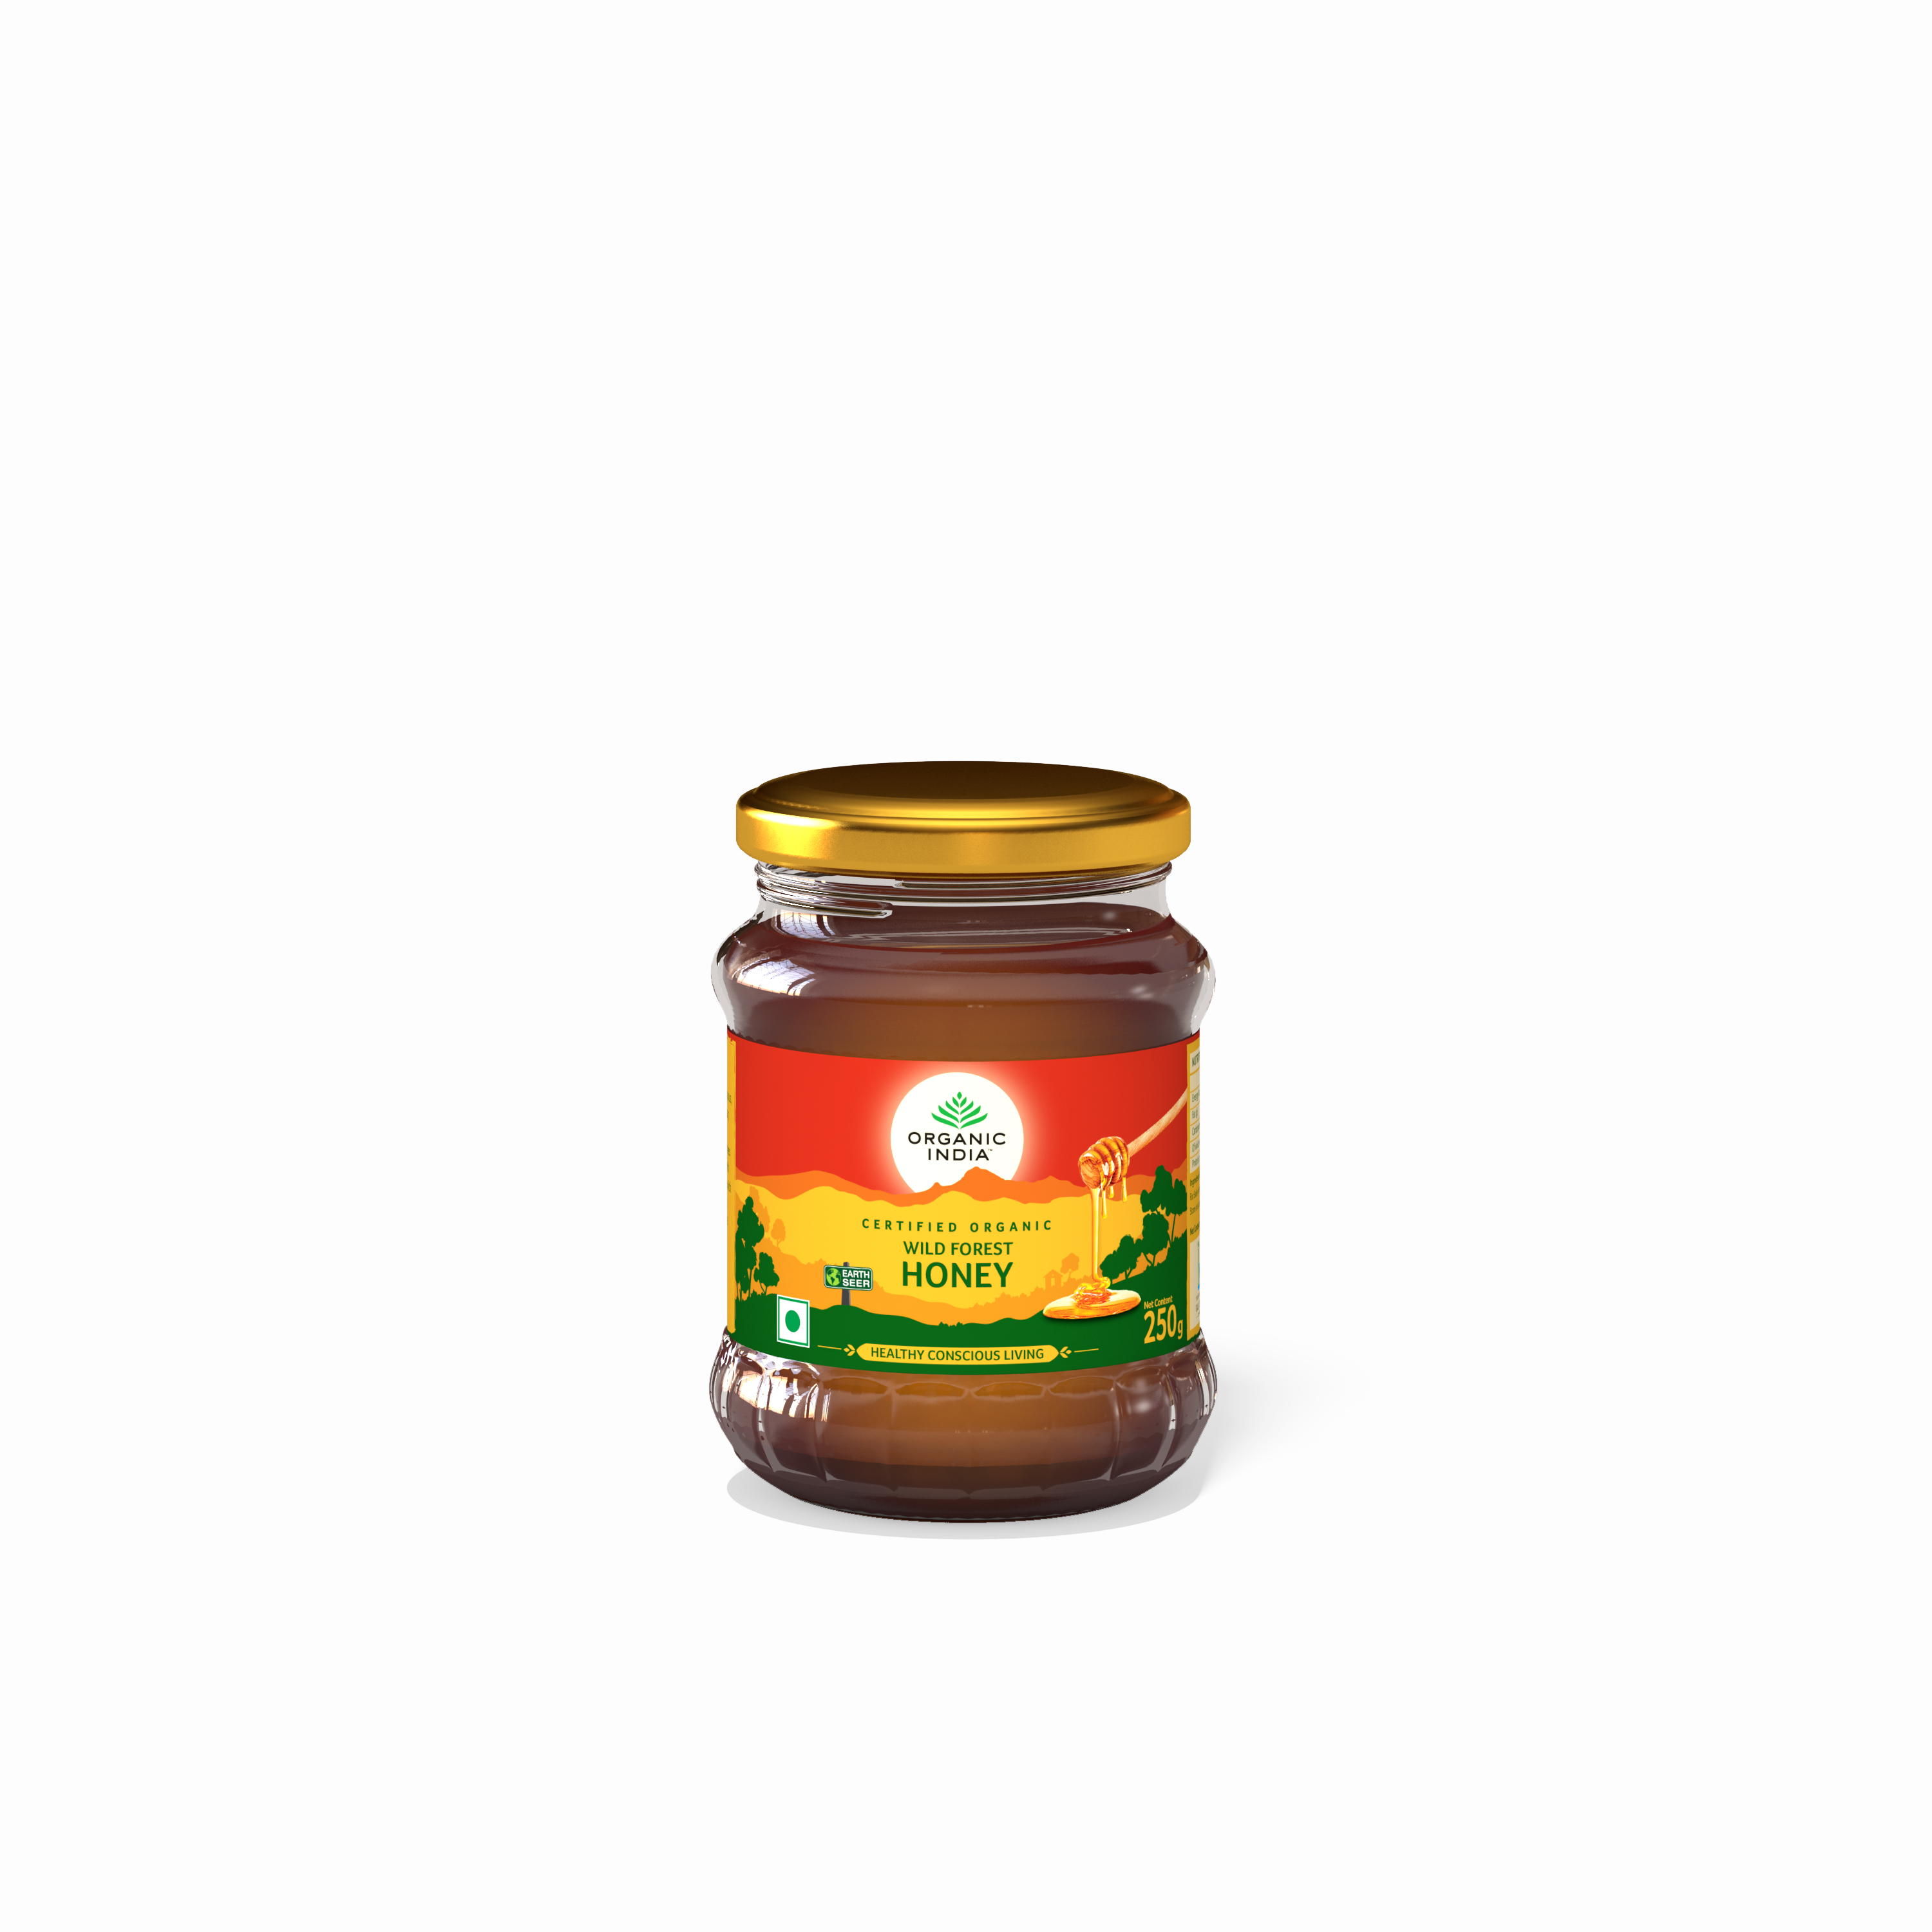 Buy Organic India Honey wild Forest at Best Price Online